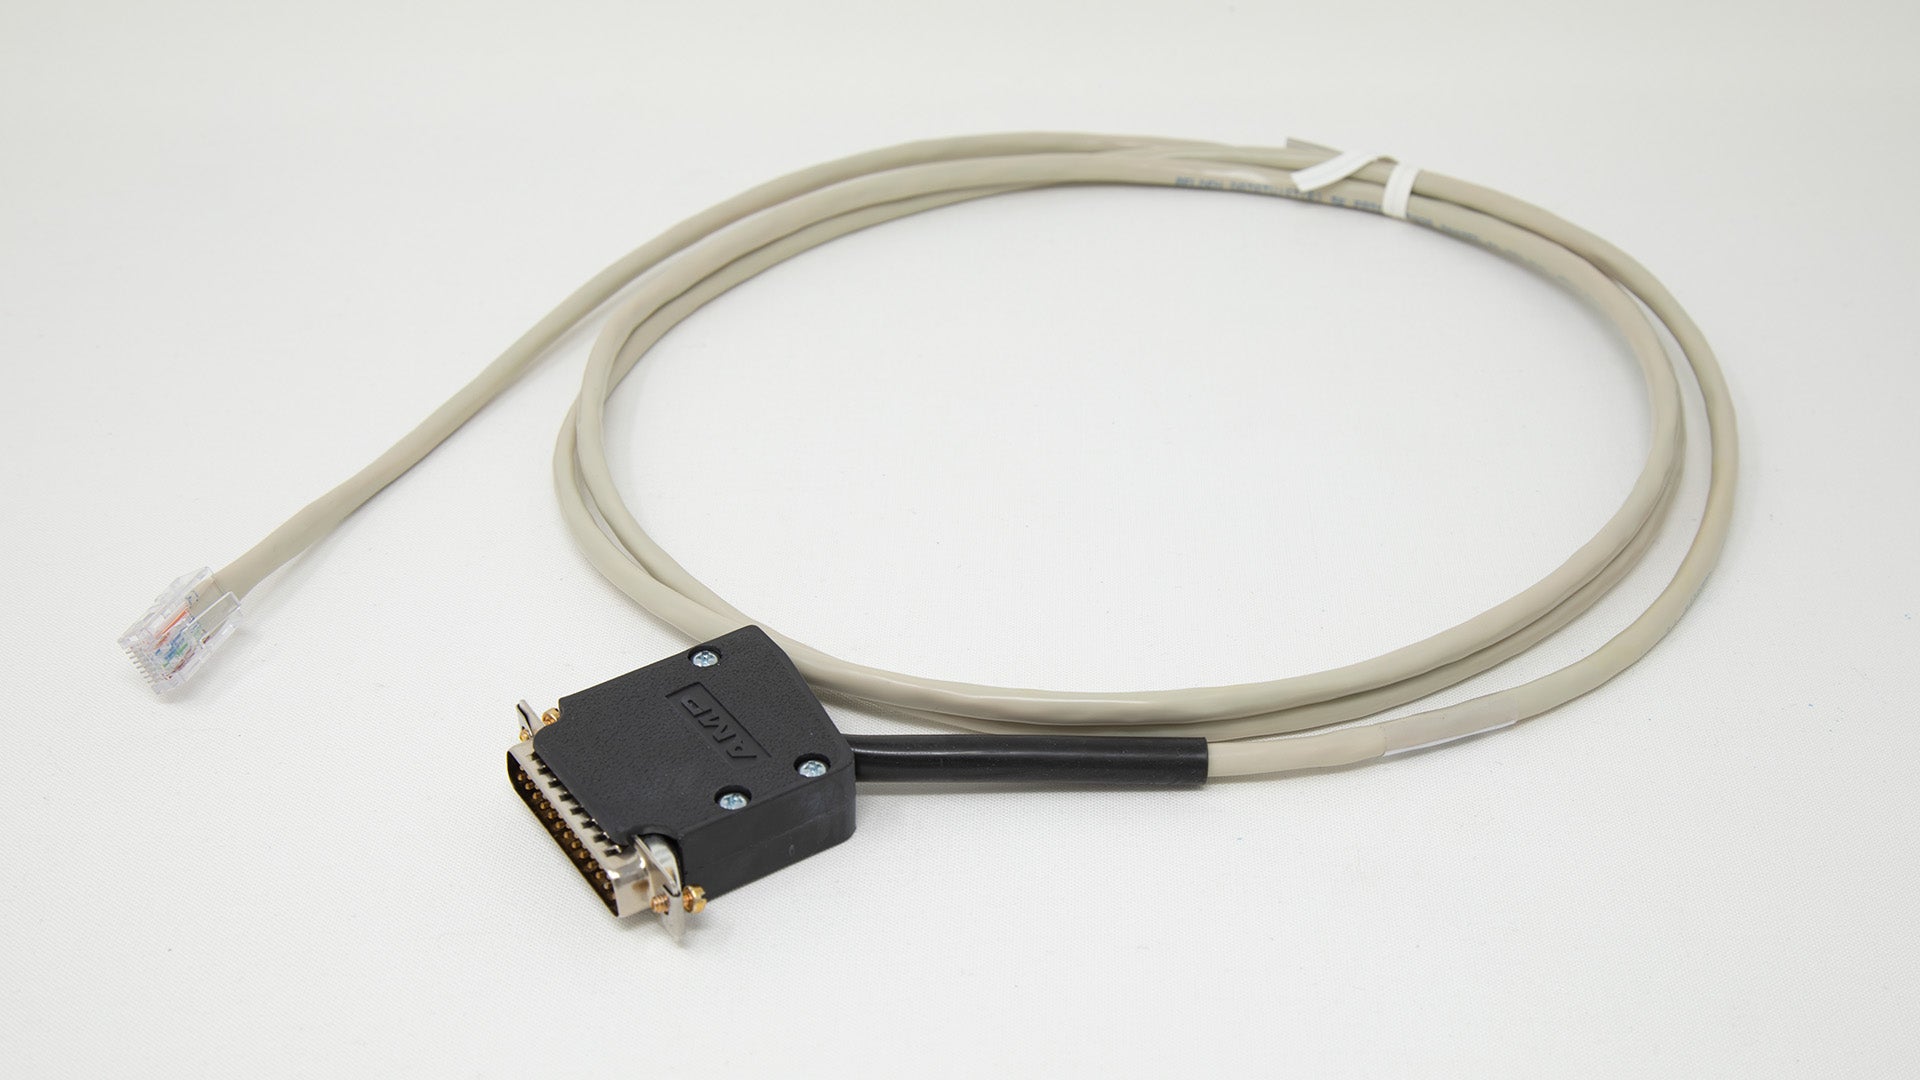 Cable with serial computer connection at one end and ethernet at other.